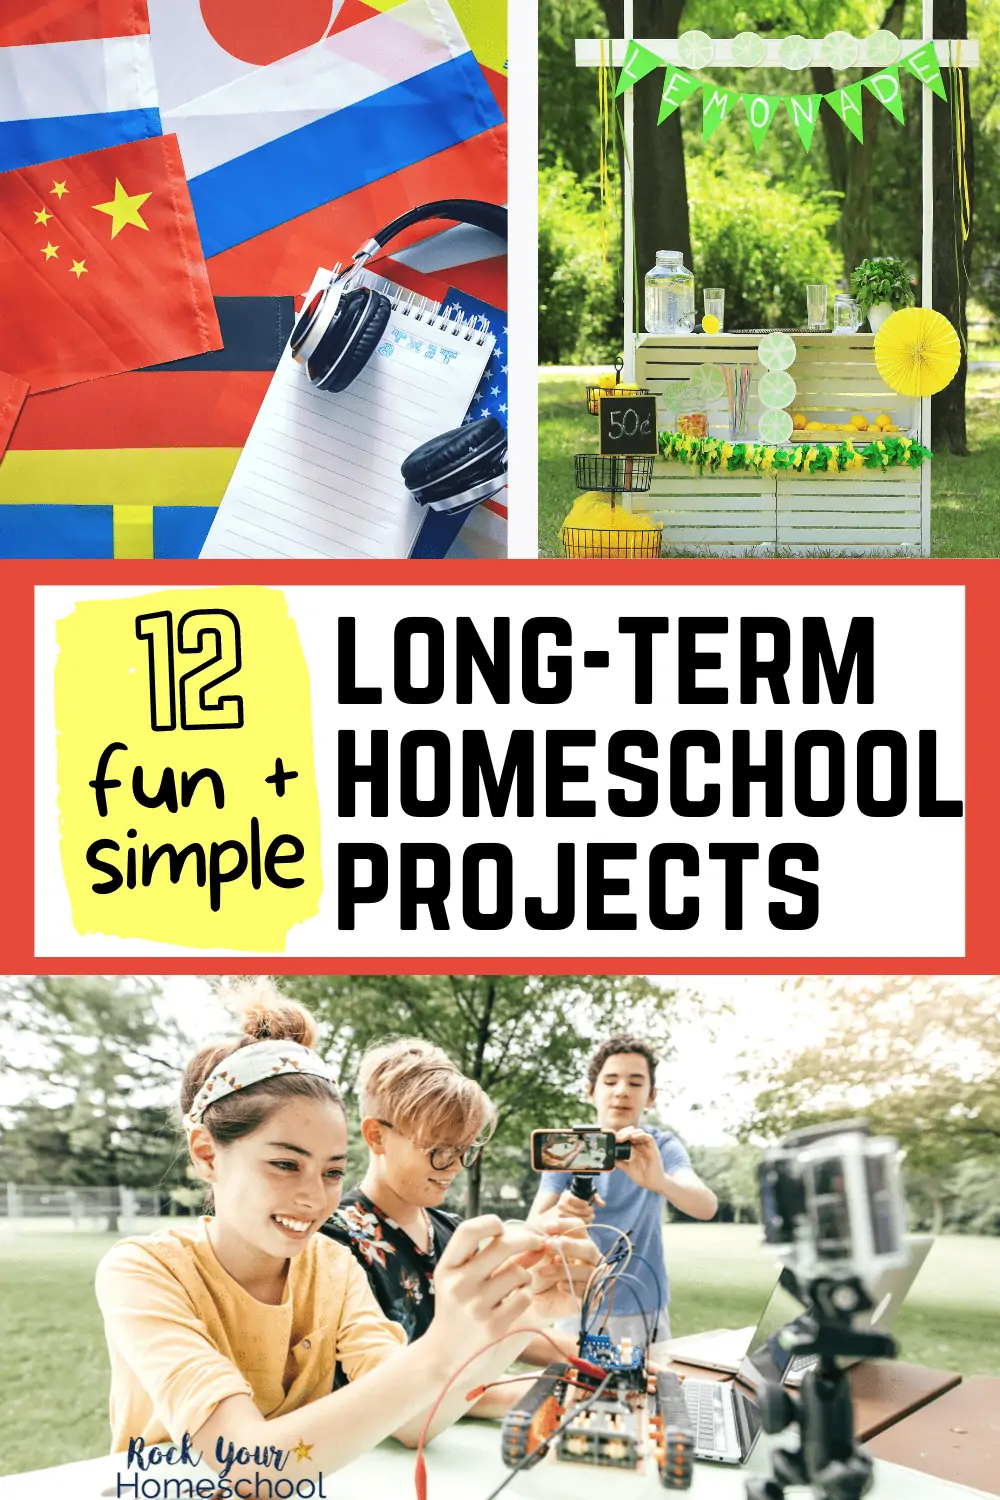 12 Long-Term Homeschool Projects for Learning Fun for All Ages